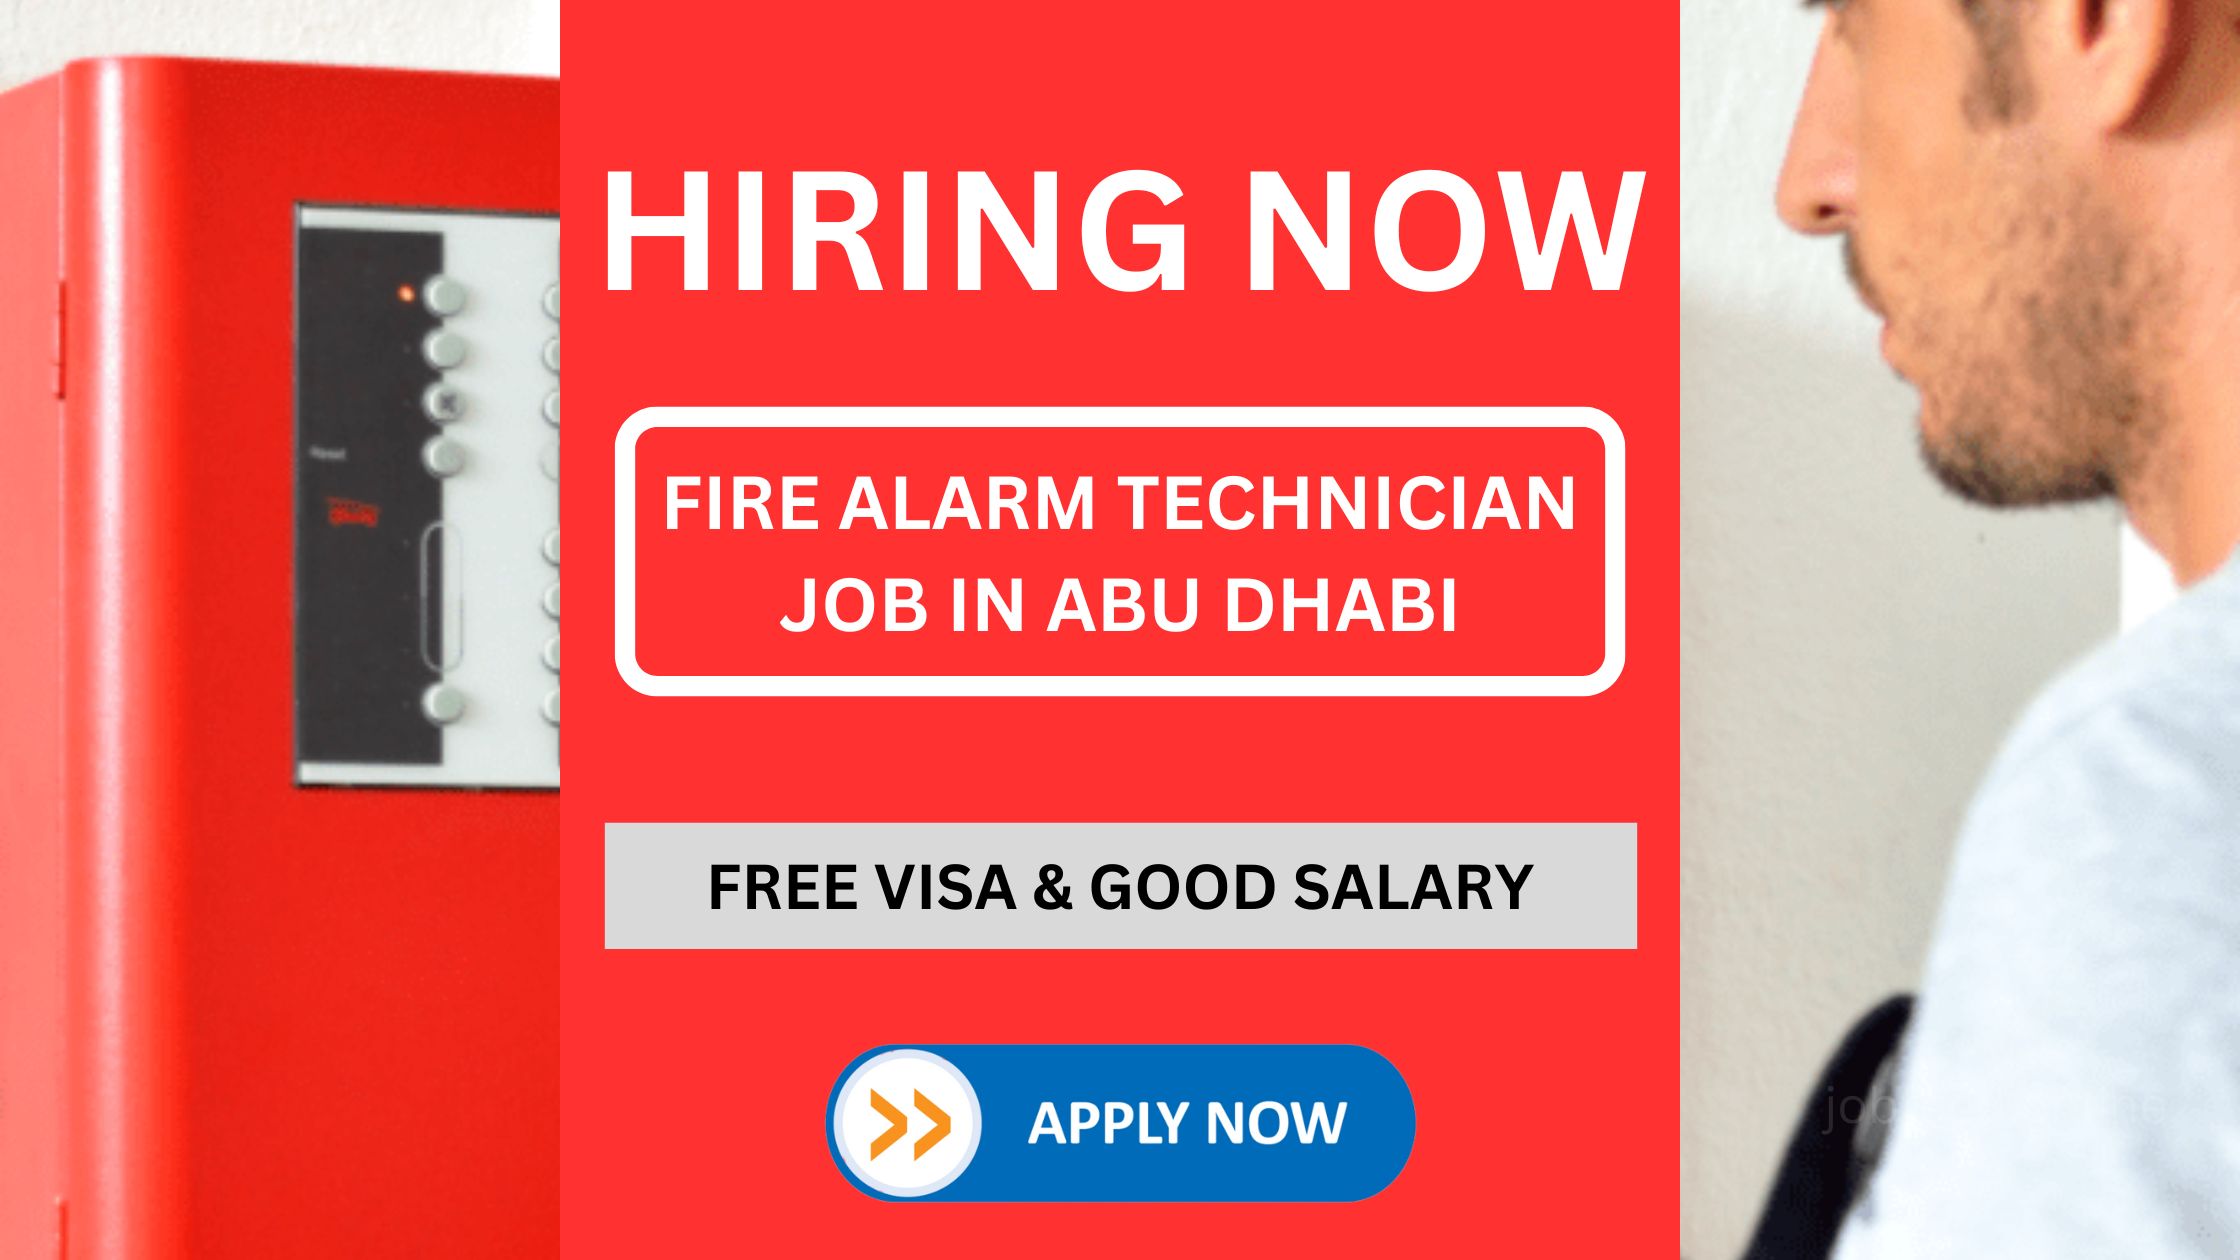 Fire Alarm Technician Position in Abu Dhabi, UAE | Company Contact Number